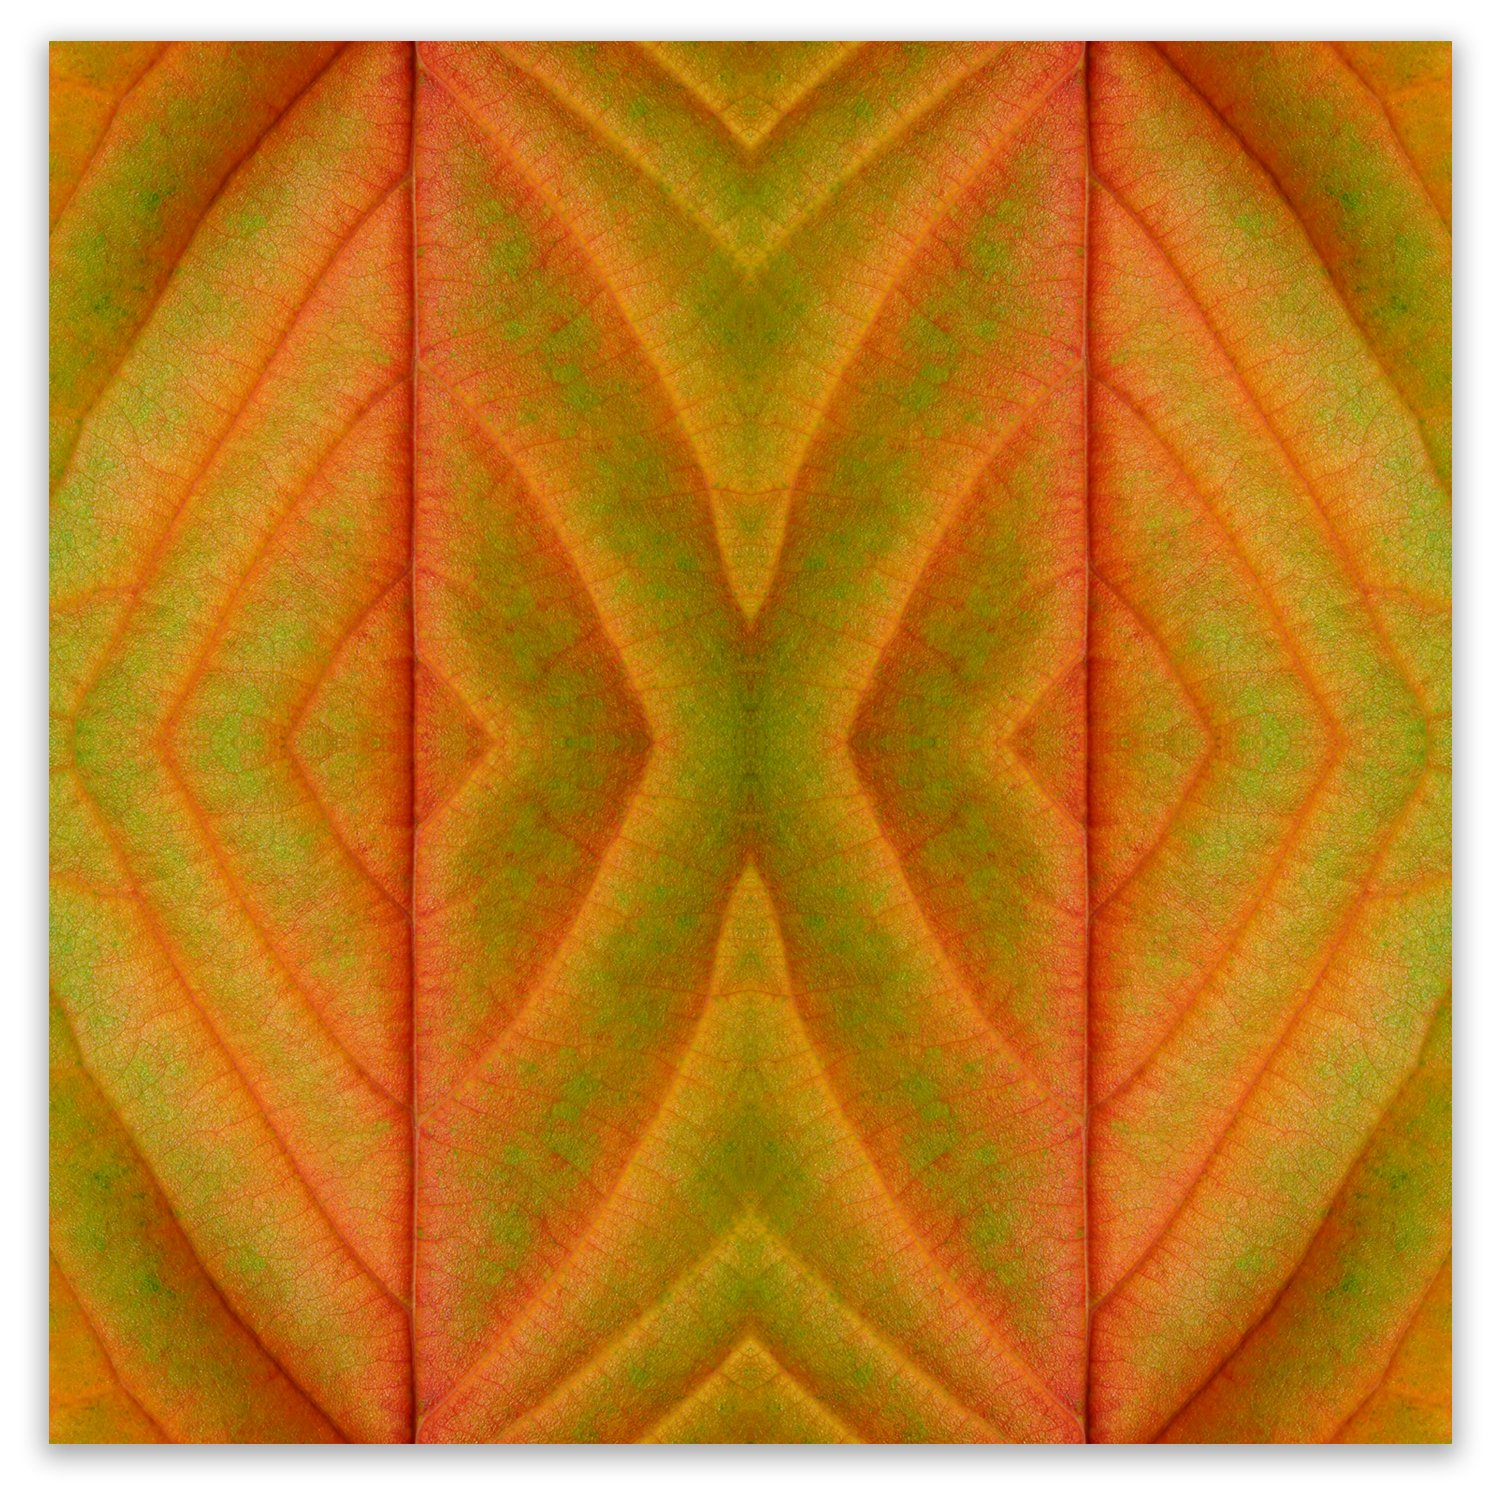 © LEAVES COMPOSITION No.33